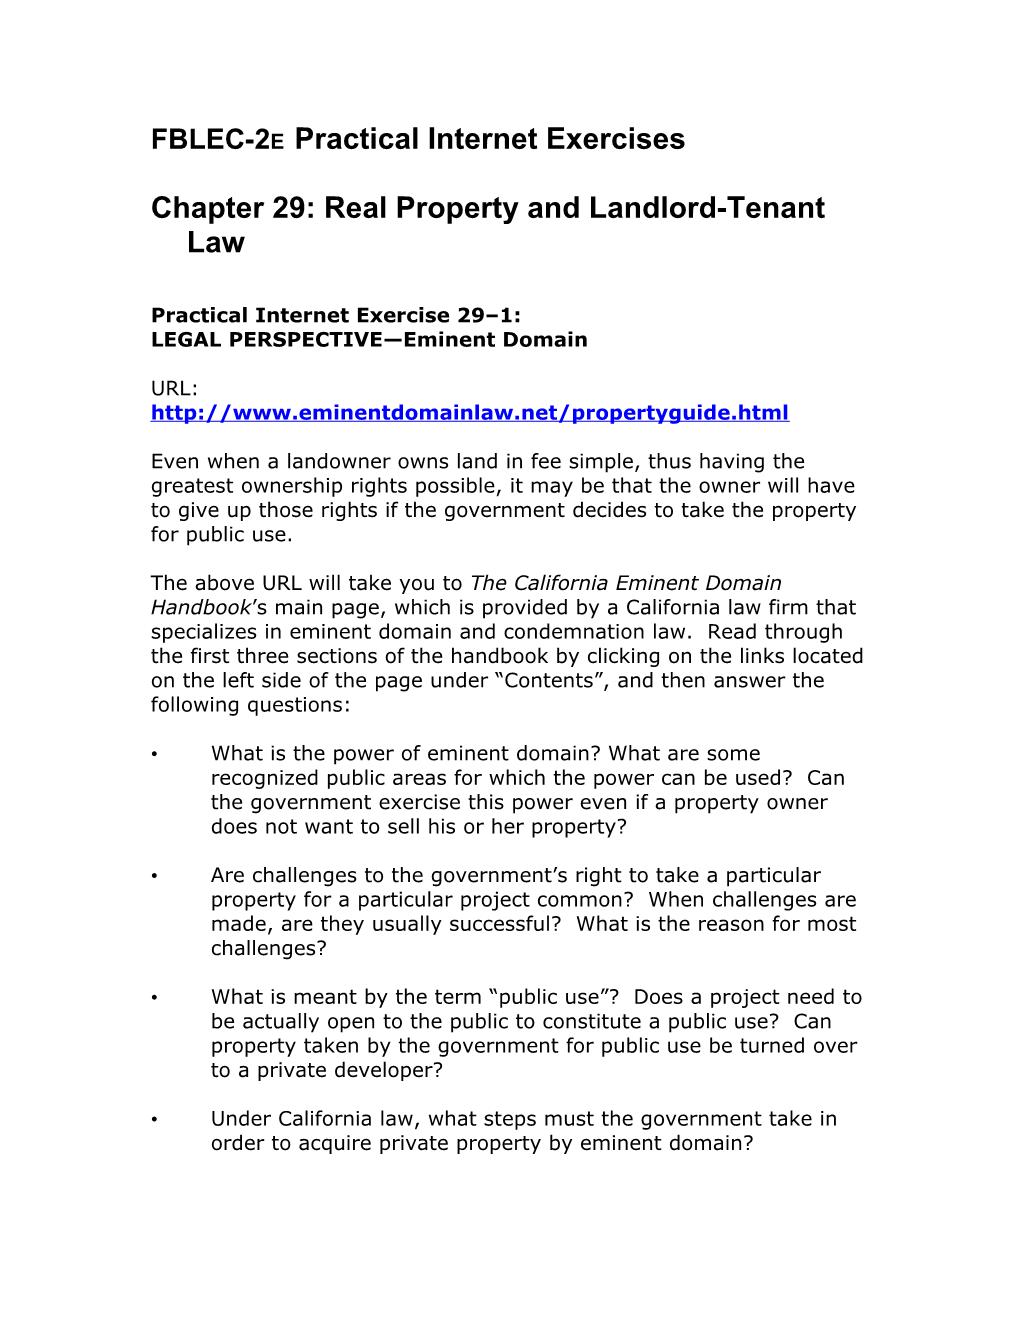 Chapter 29: Real Property and Landlord-Tenant Law